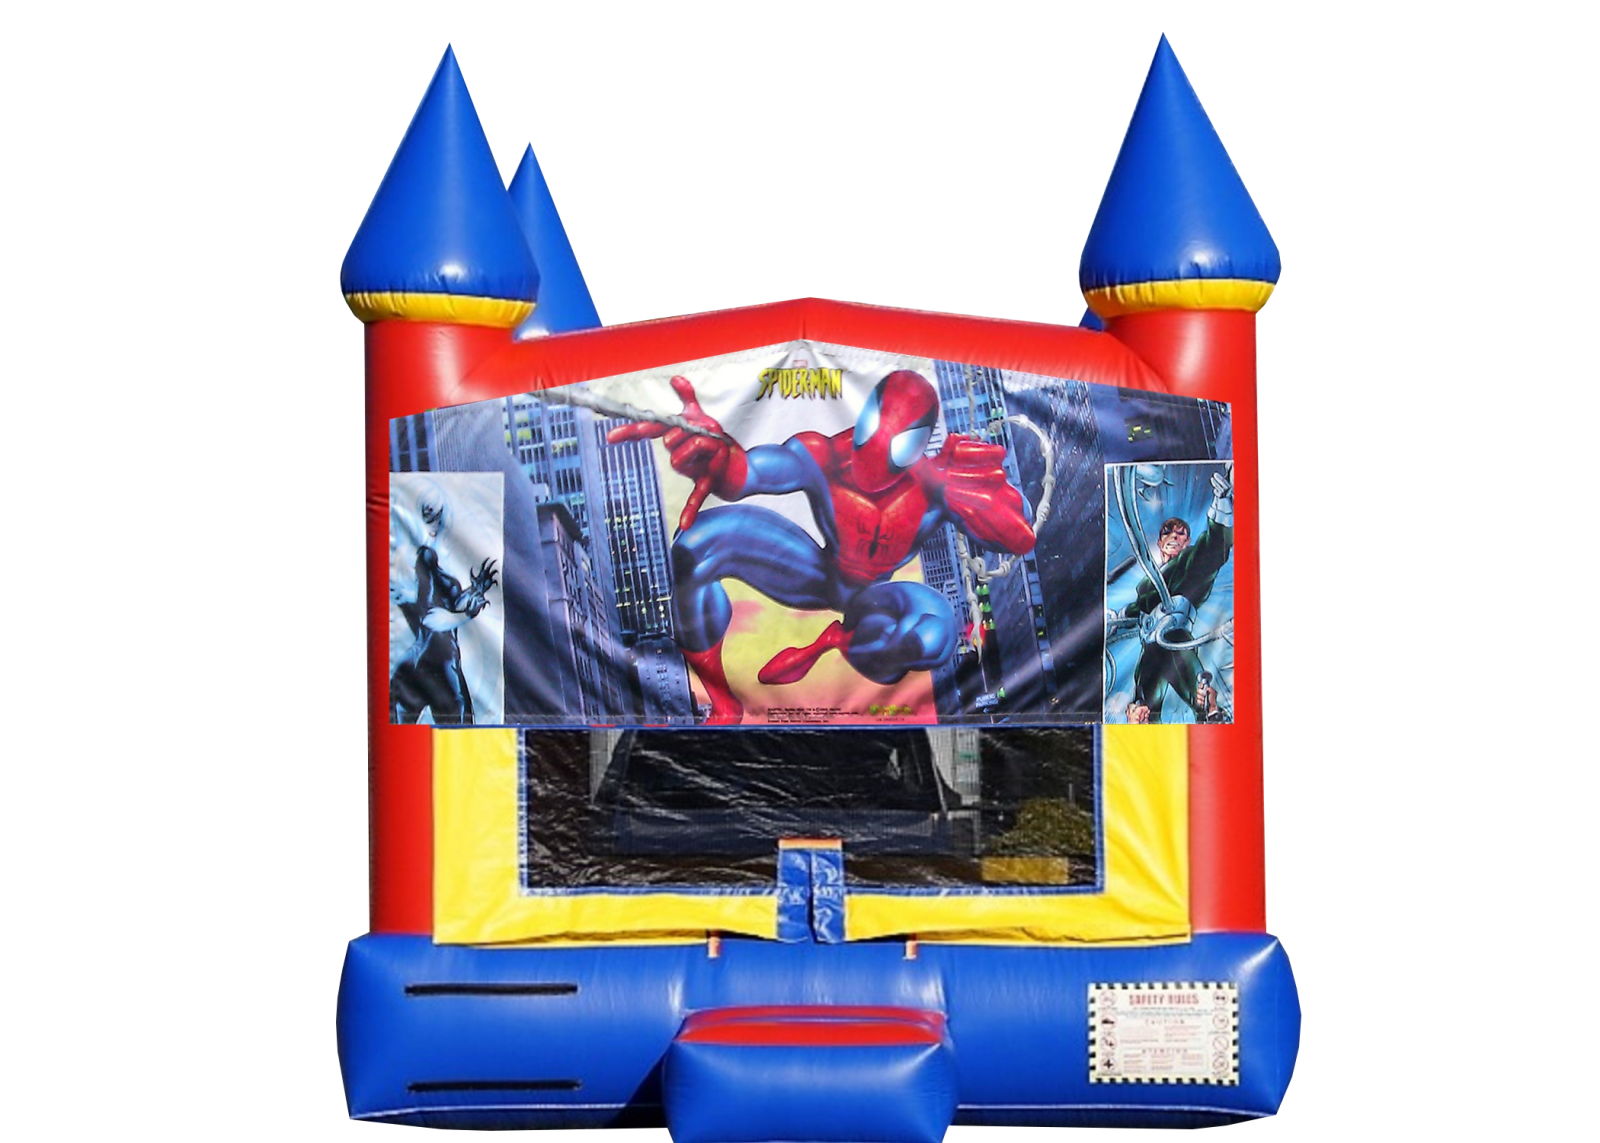 Spiderman Bounce House rental Nashville TN Jumping Hearts Party Rentals